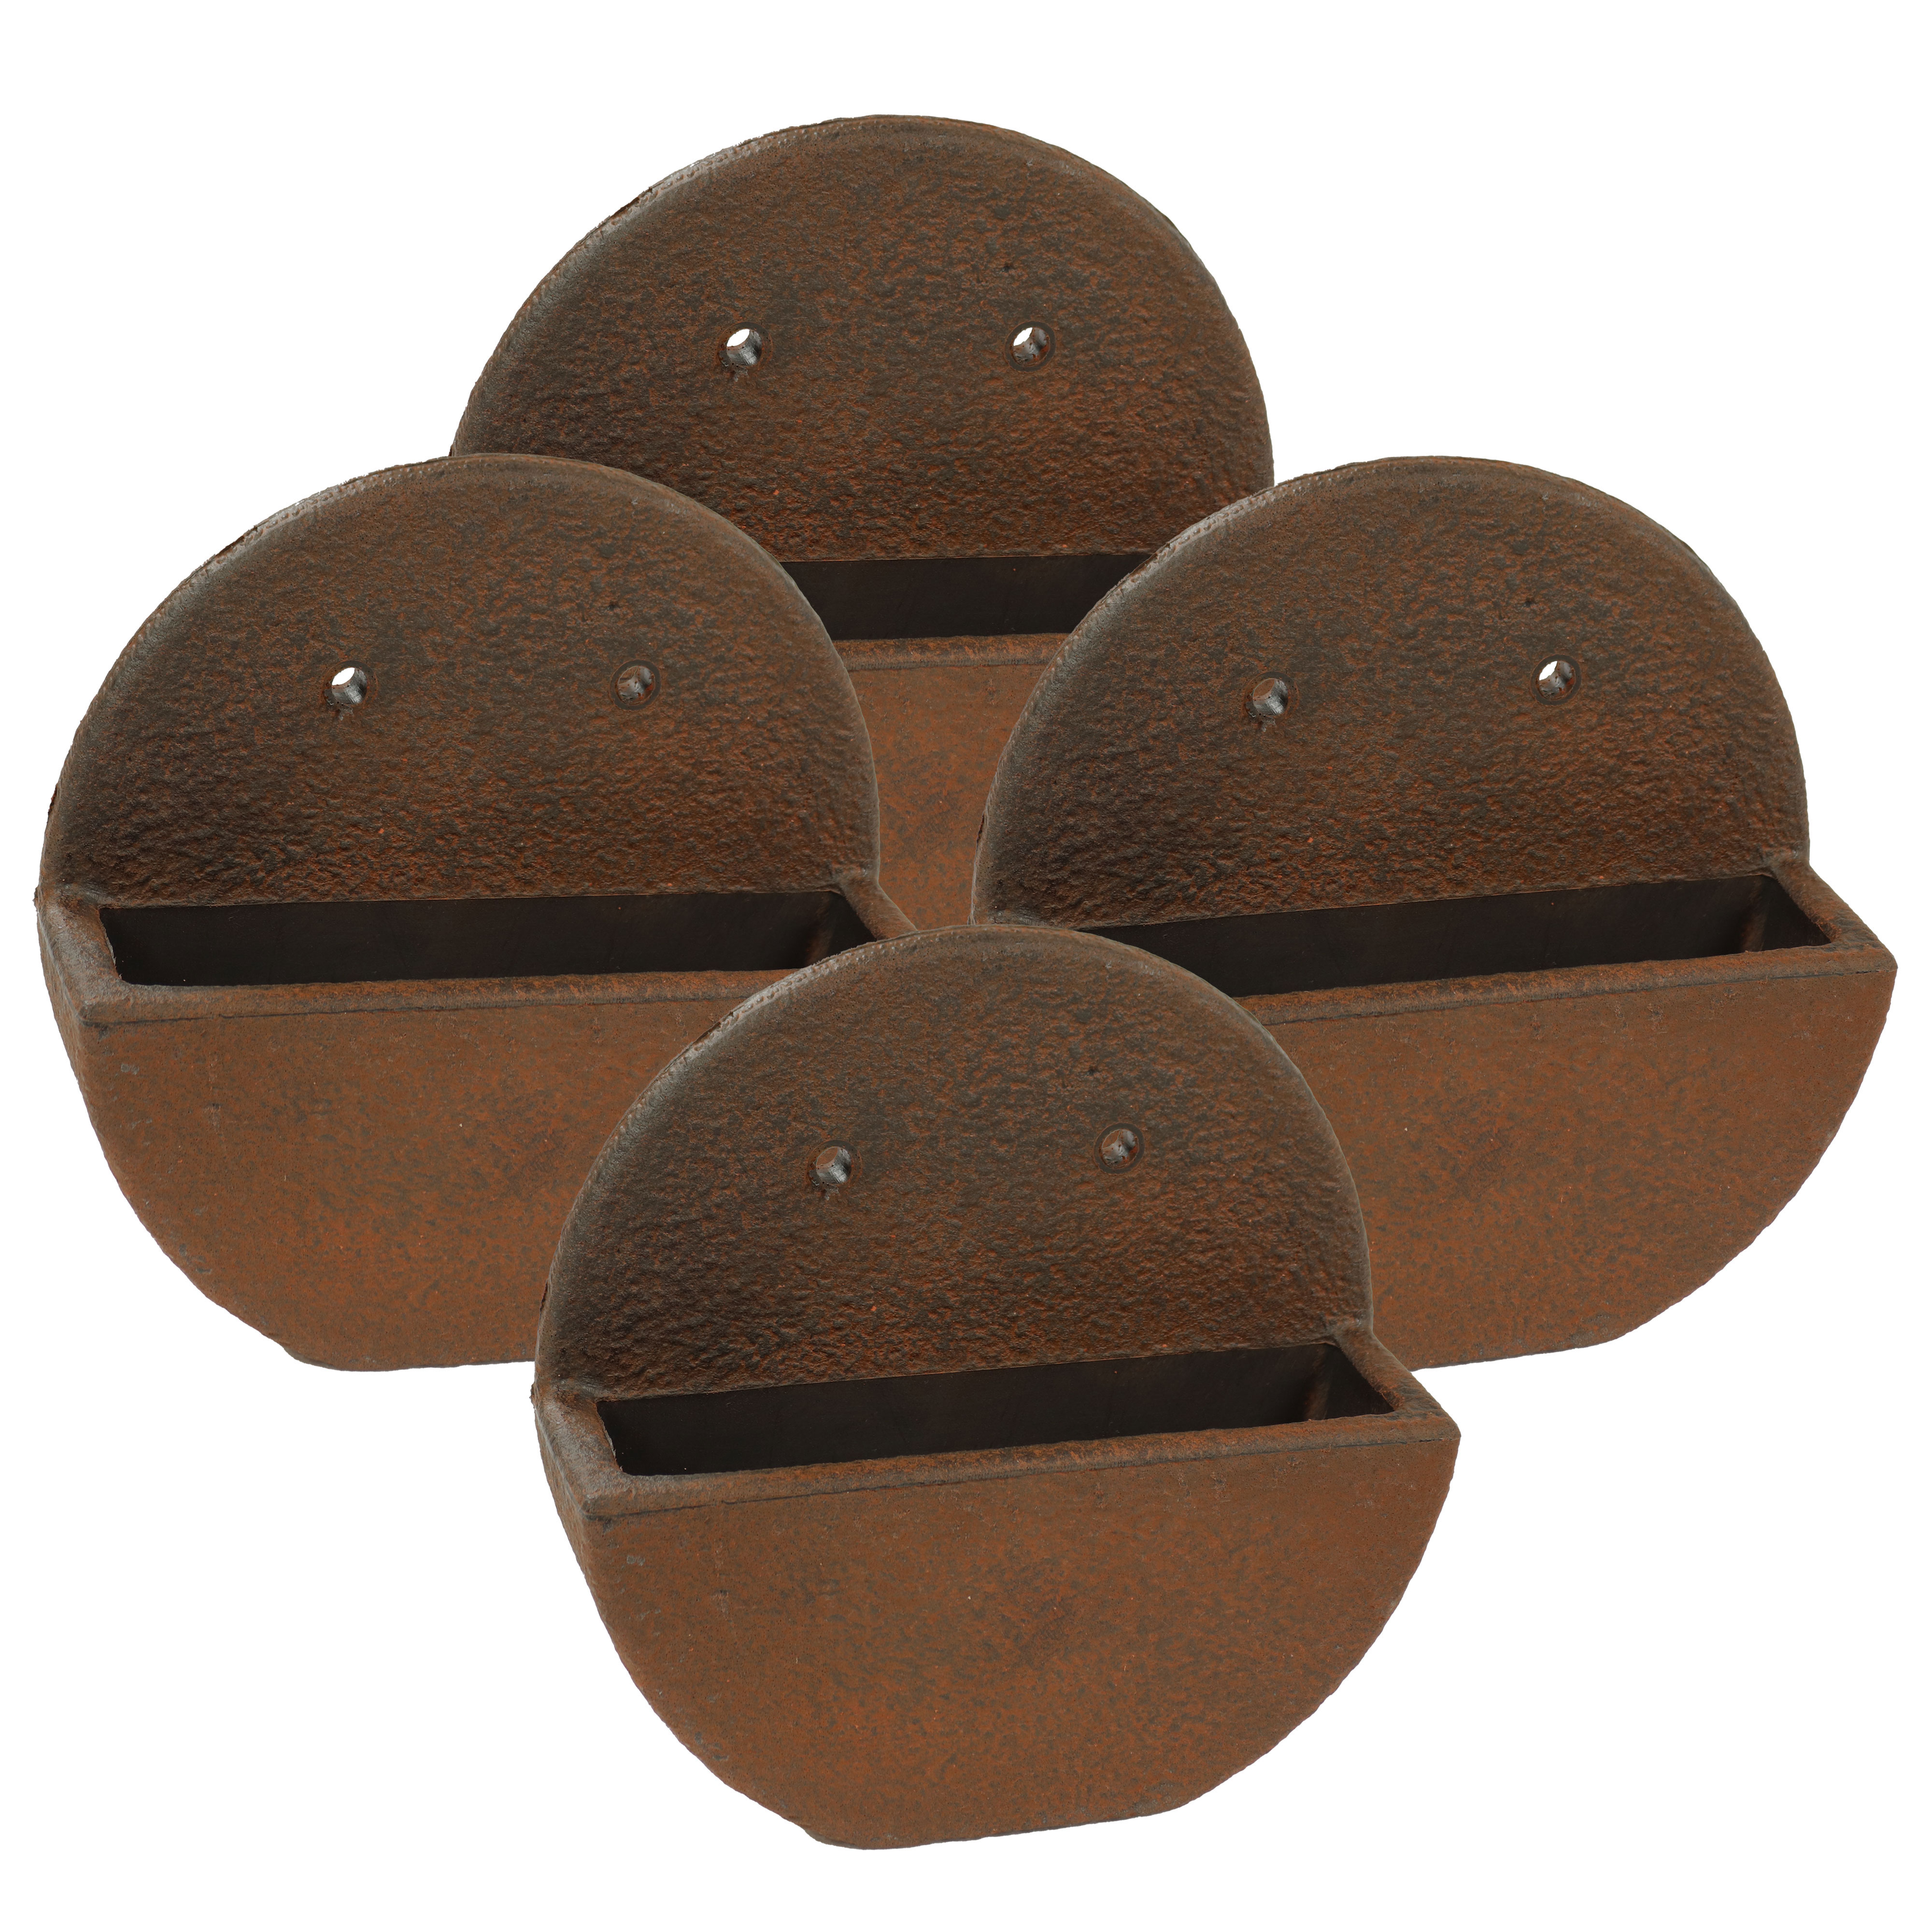 12 in Wall-Mounted Outdoor Planter - Dark Brown - Set of 4